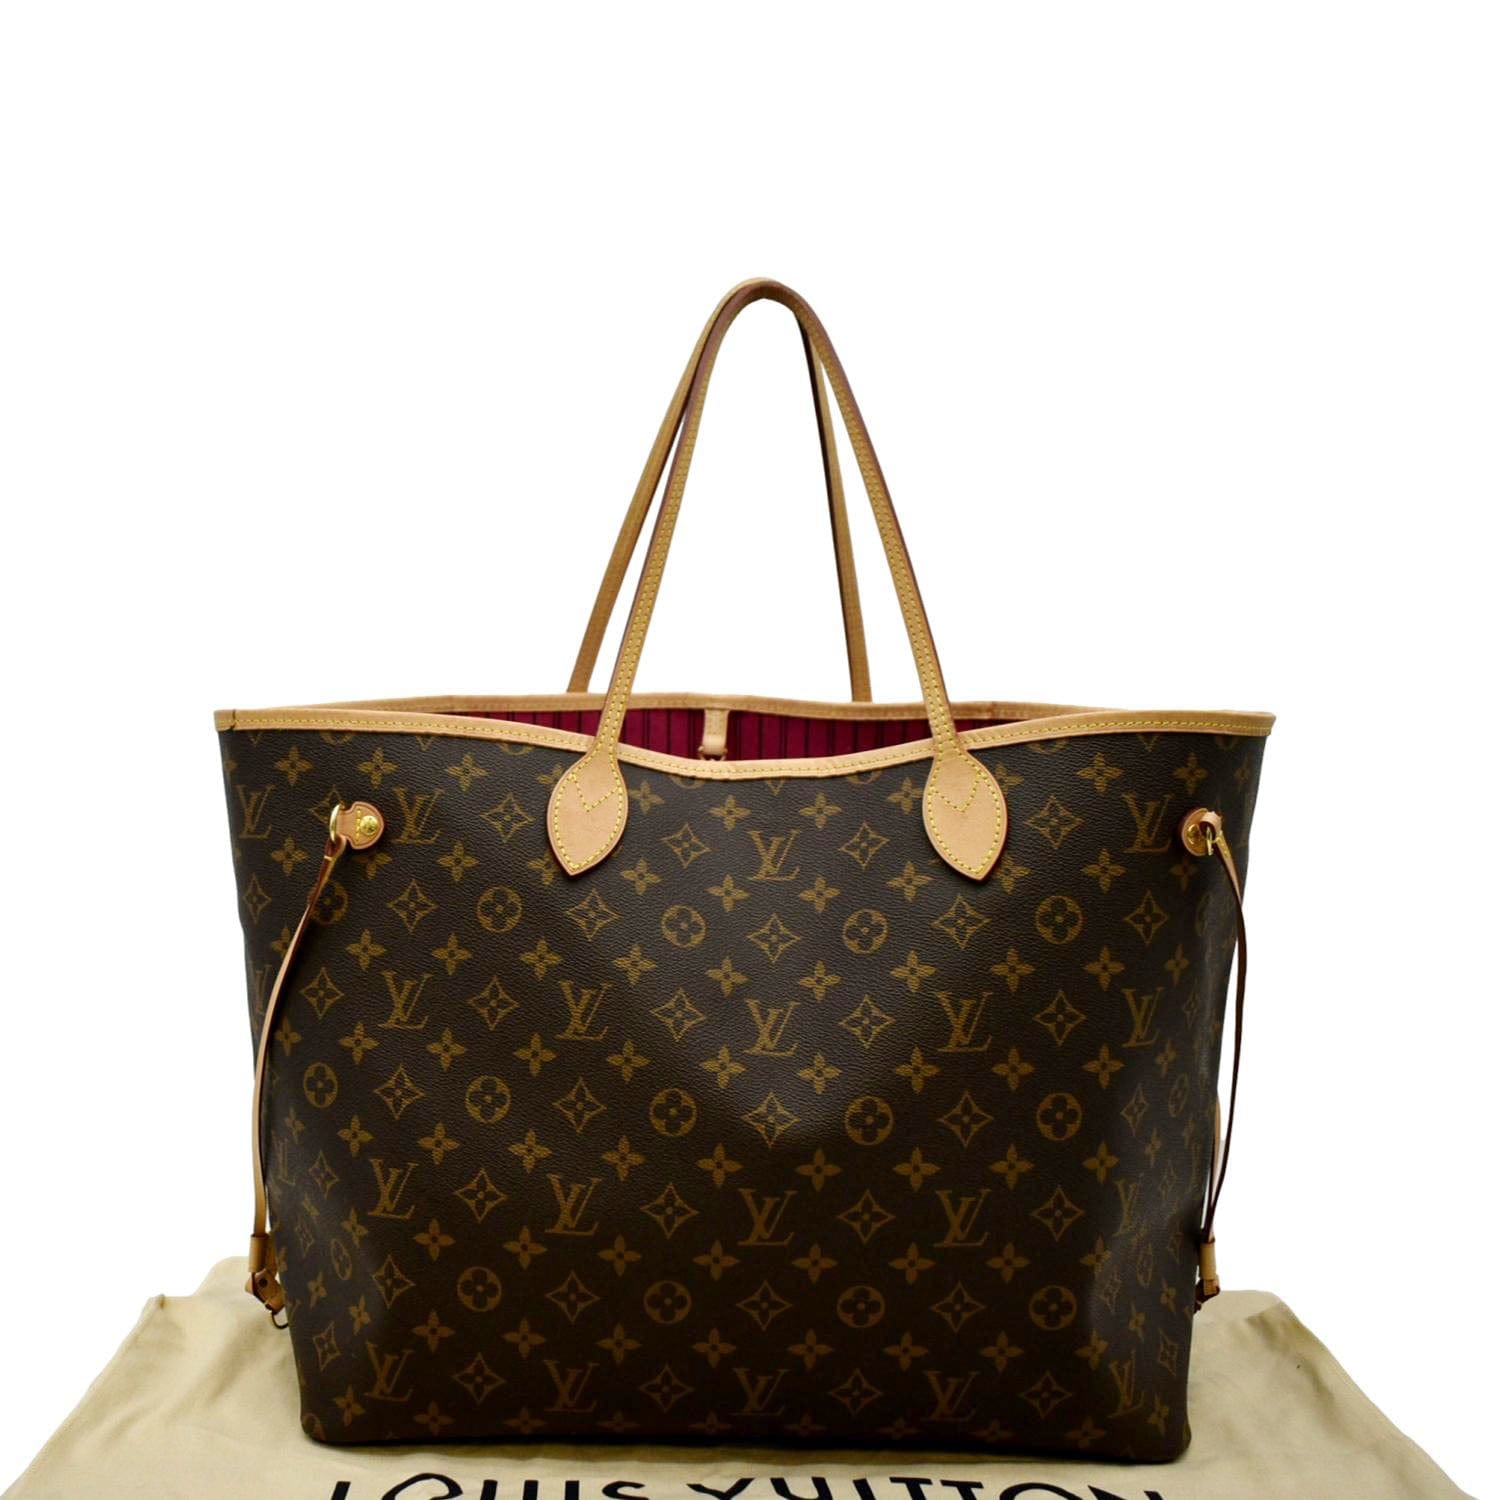 The Louis Vuitton Neverfull is a must for travel. Add a Trousse